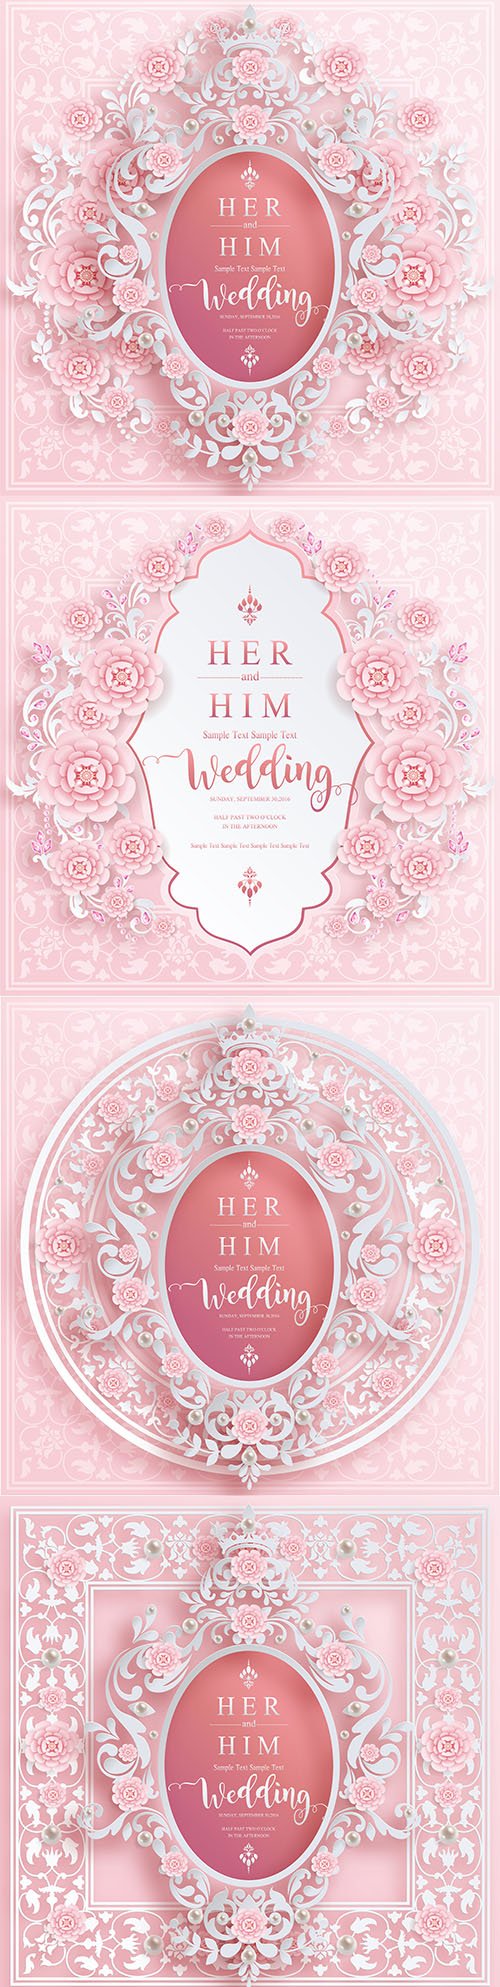 Wedding invitations and patterns on background colored paper